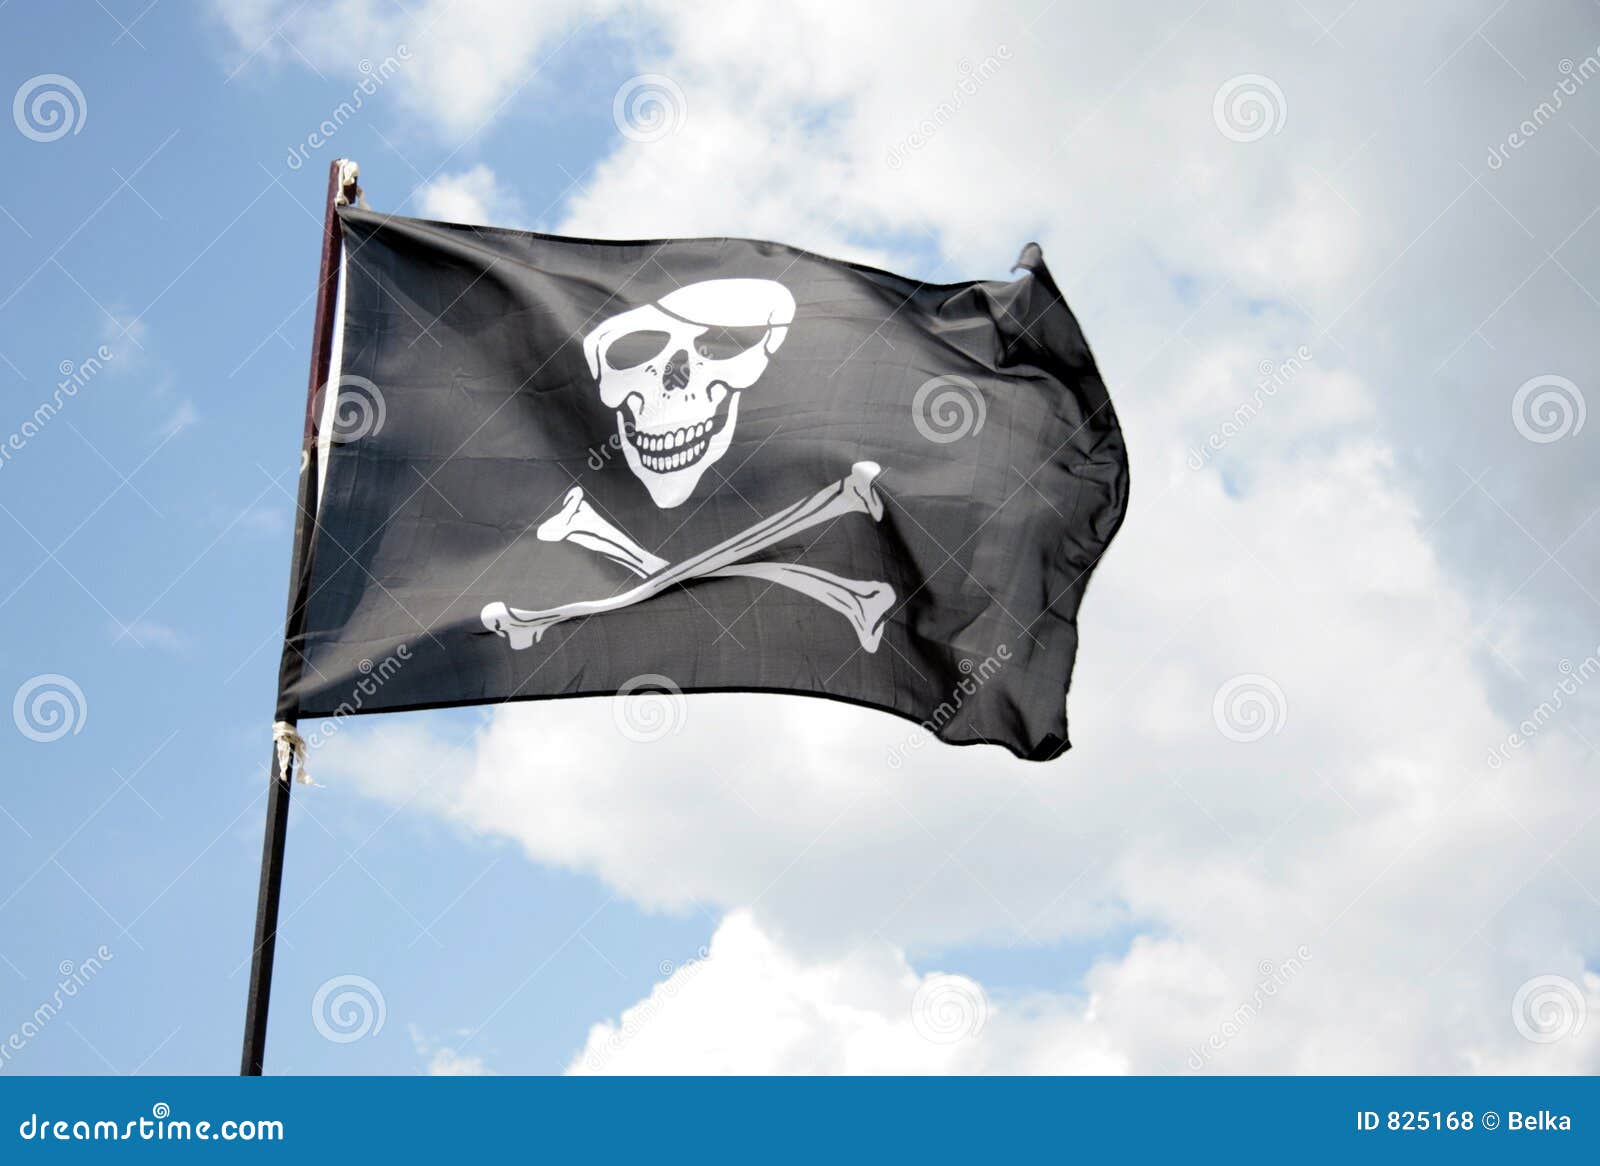 Pirates ditch Jolly Roger, make 'P' primary logo